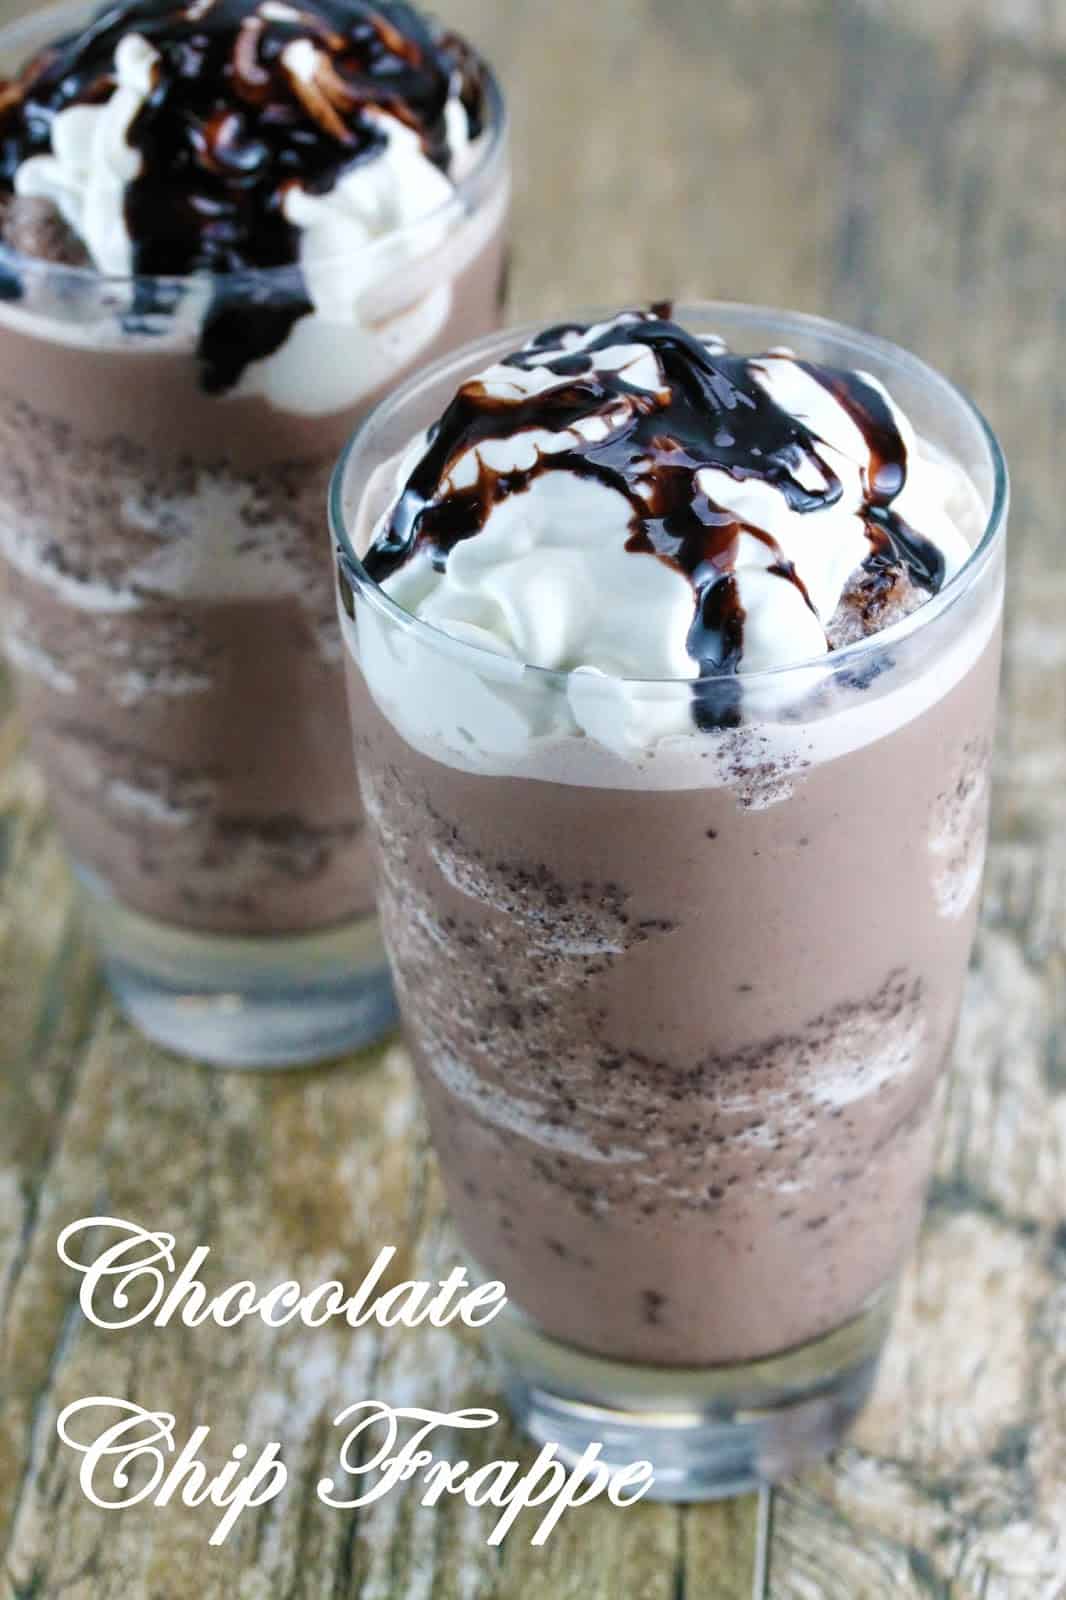 Two Homemade Chocolate Chip Frappes on a wood countertop.